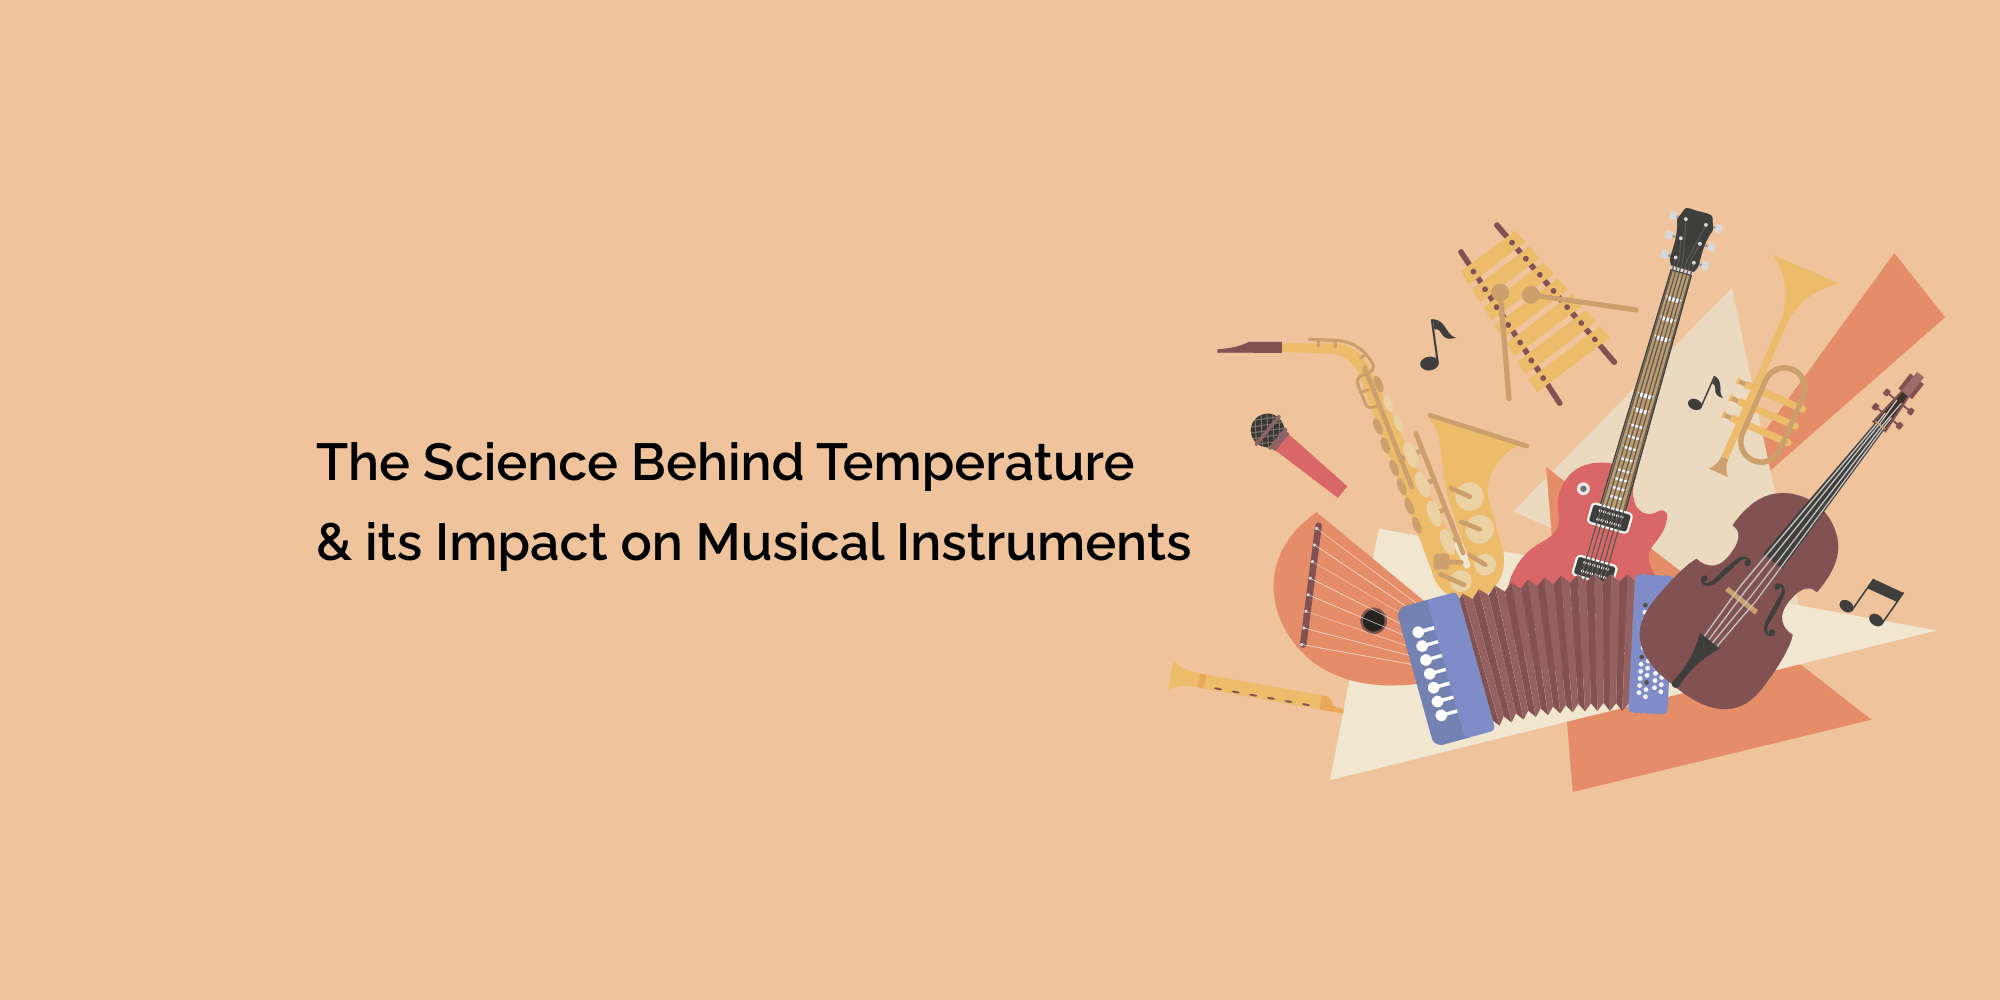 The Science Behind Temperature and its Impact on Musical Instruments